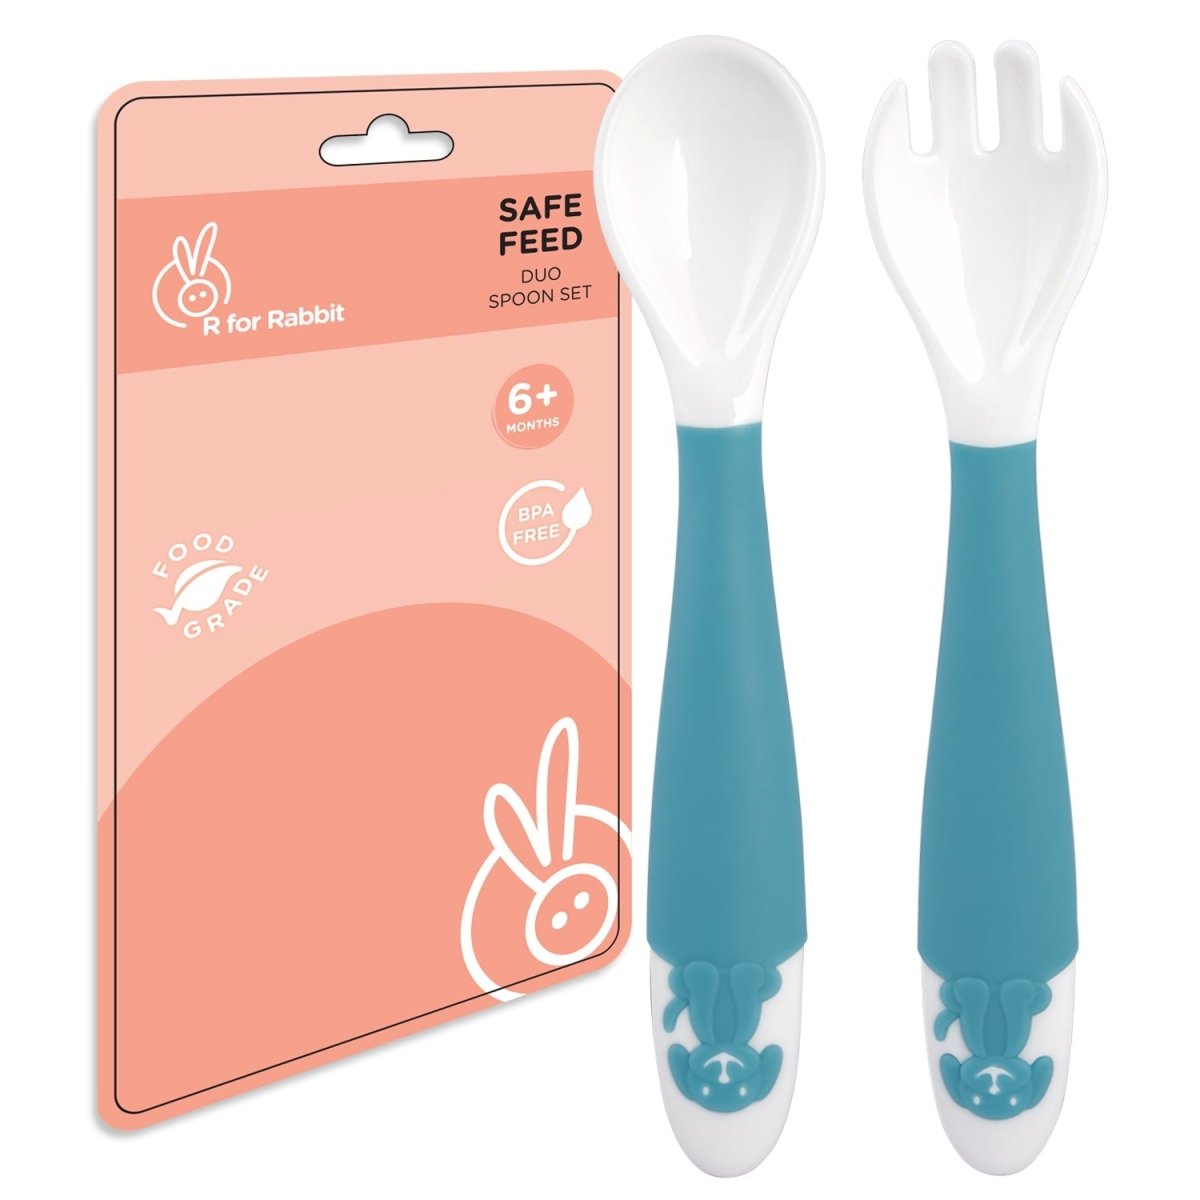 R for Rabbit Safe Feed Duo Spoon Set- Blue - SFDSB01